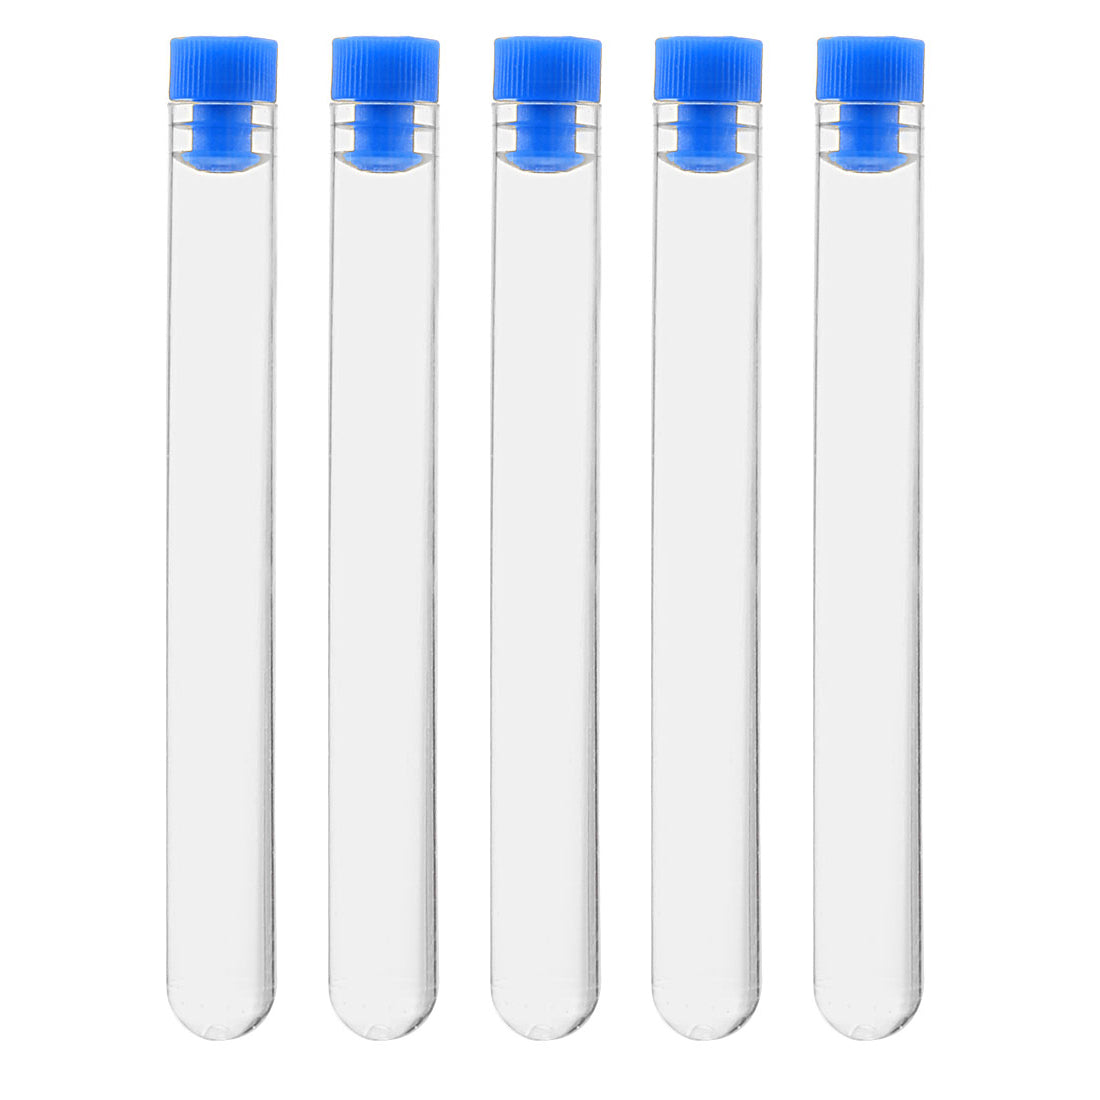 Uxcell Uxcell 20 Pcs Centrifuge Test Tubes Round Bottom Polystyrene with White Cap 12 x 100mm